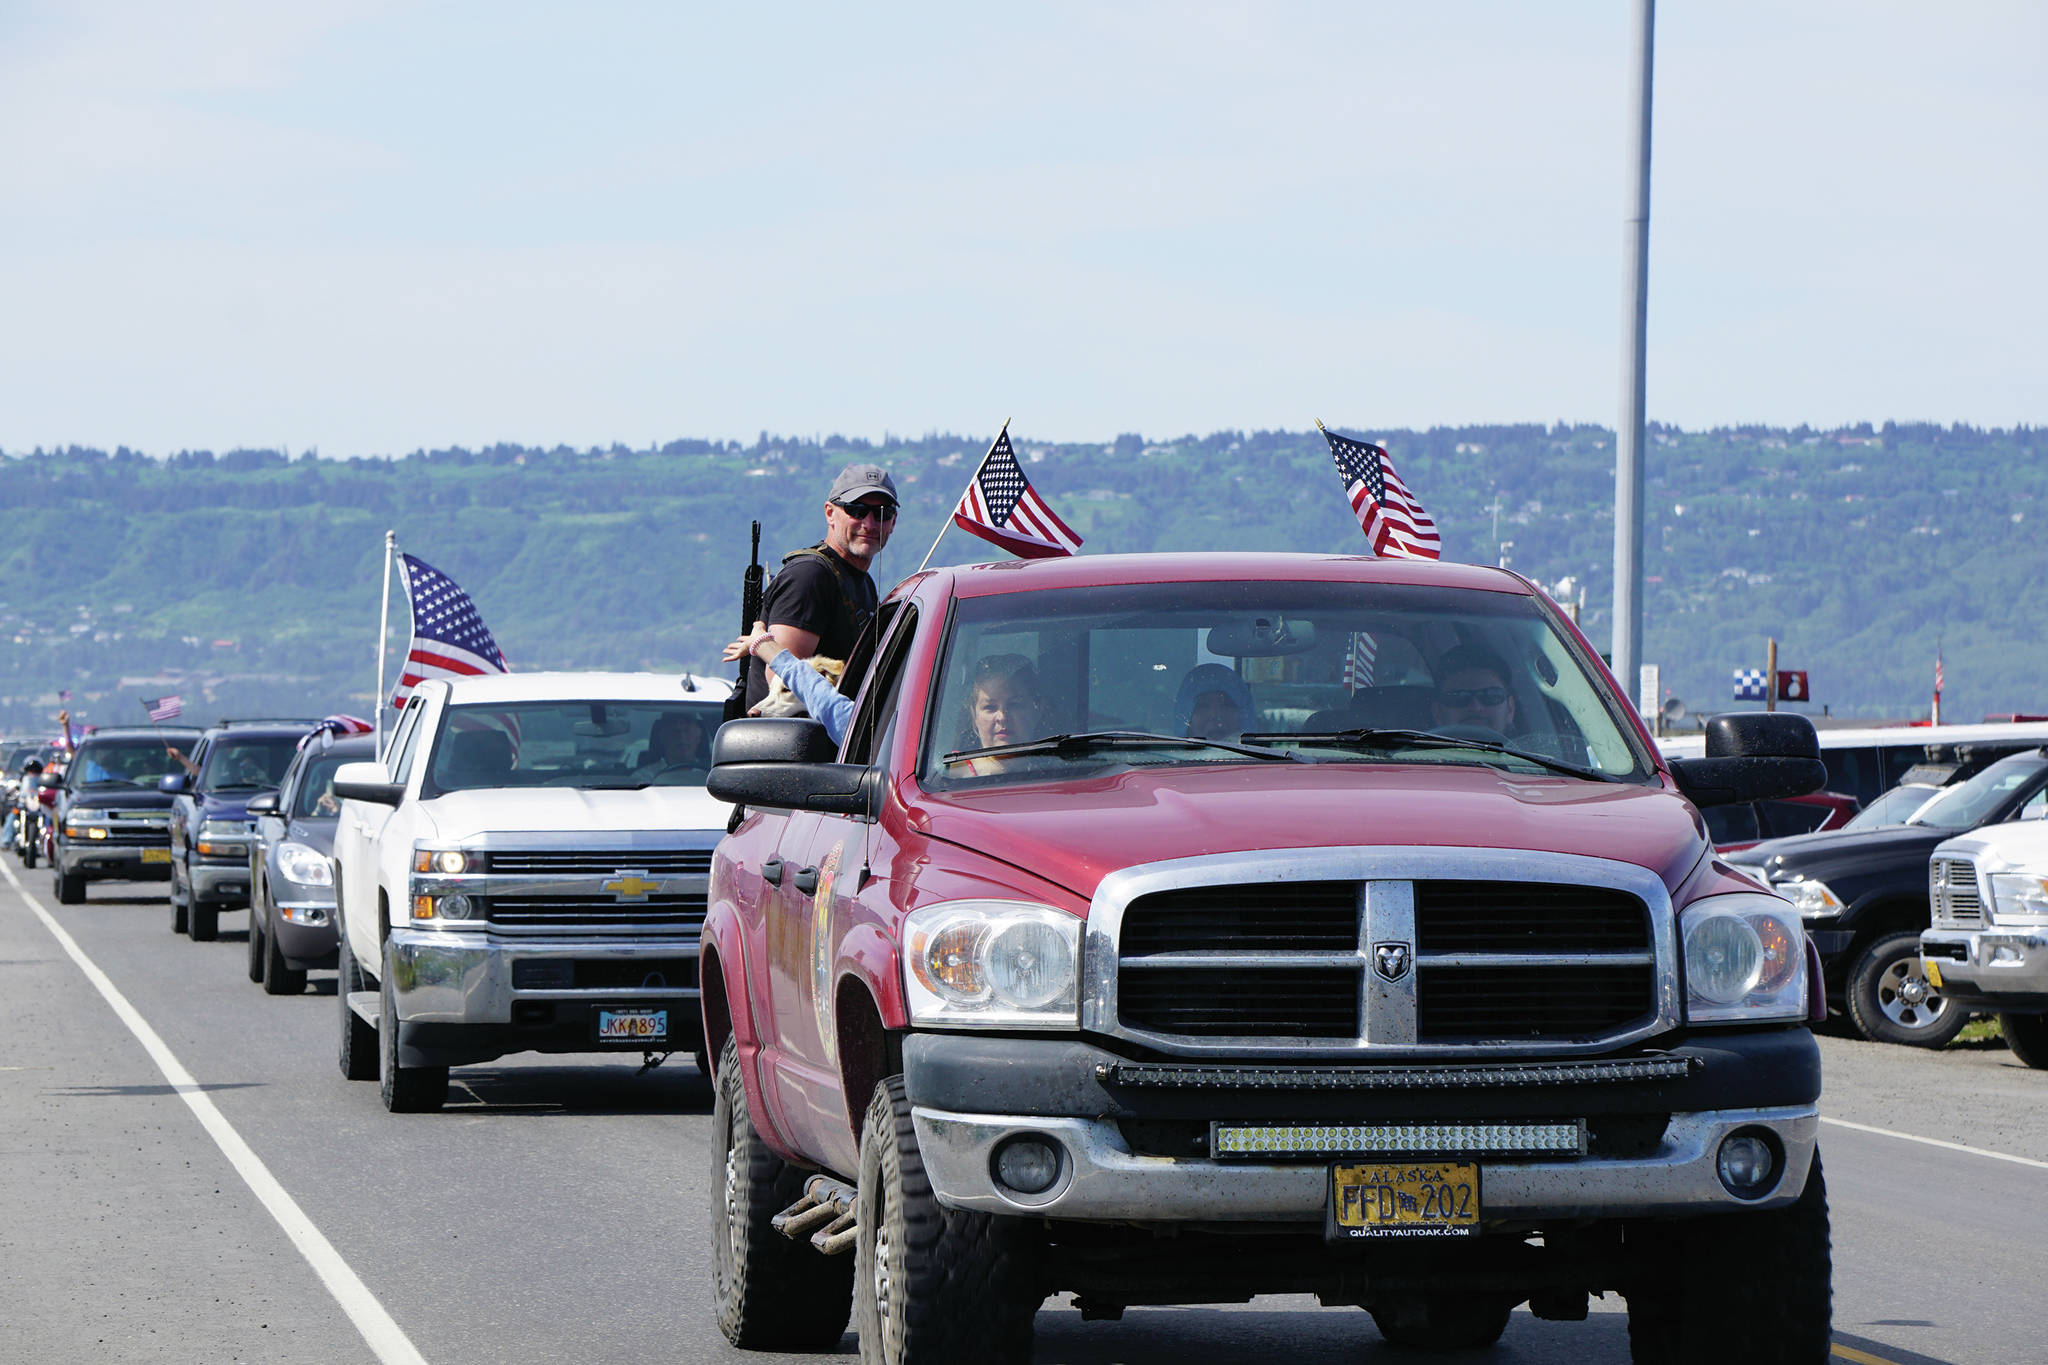 A man with an assault-style rifle rides in the back of a truck on Saturday, July 4, 2020, part of a community organized parade that went from Soundview Avenue on the Sterling Highway to the end of the Homer Spit in Homer, Alaska. (Photo by Michael Armstrong/Homer News)